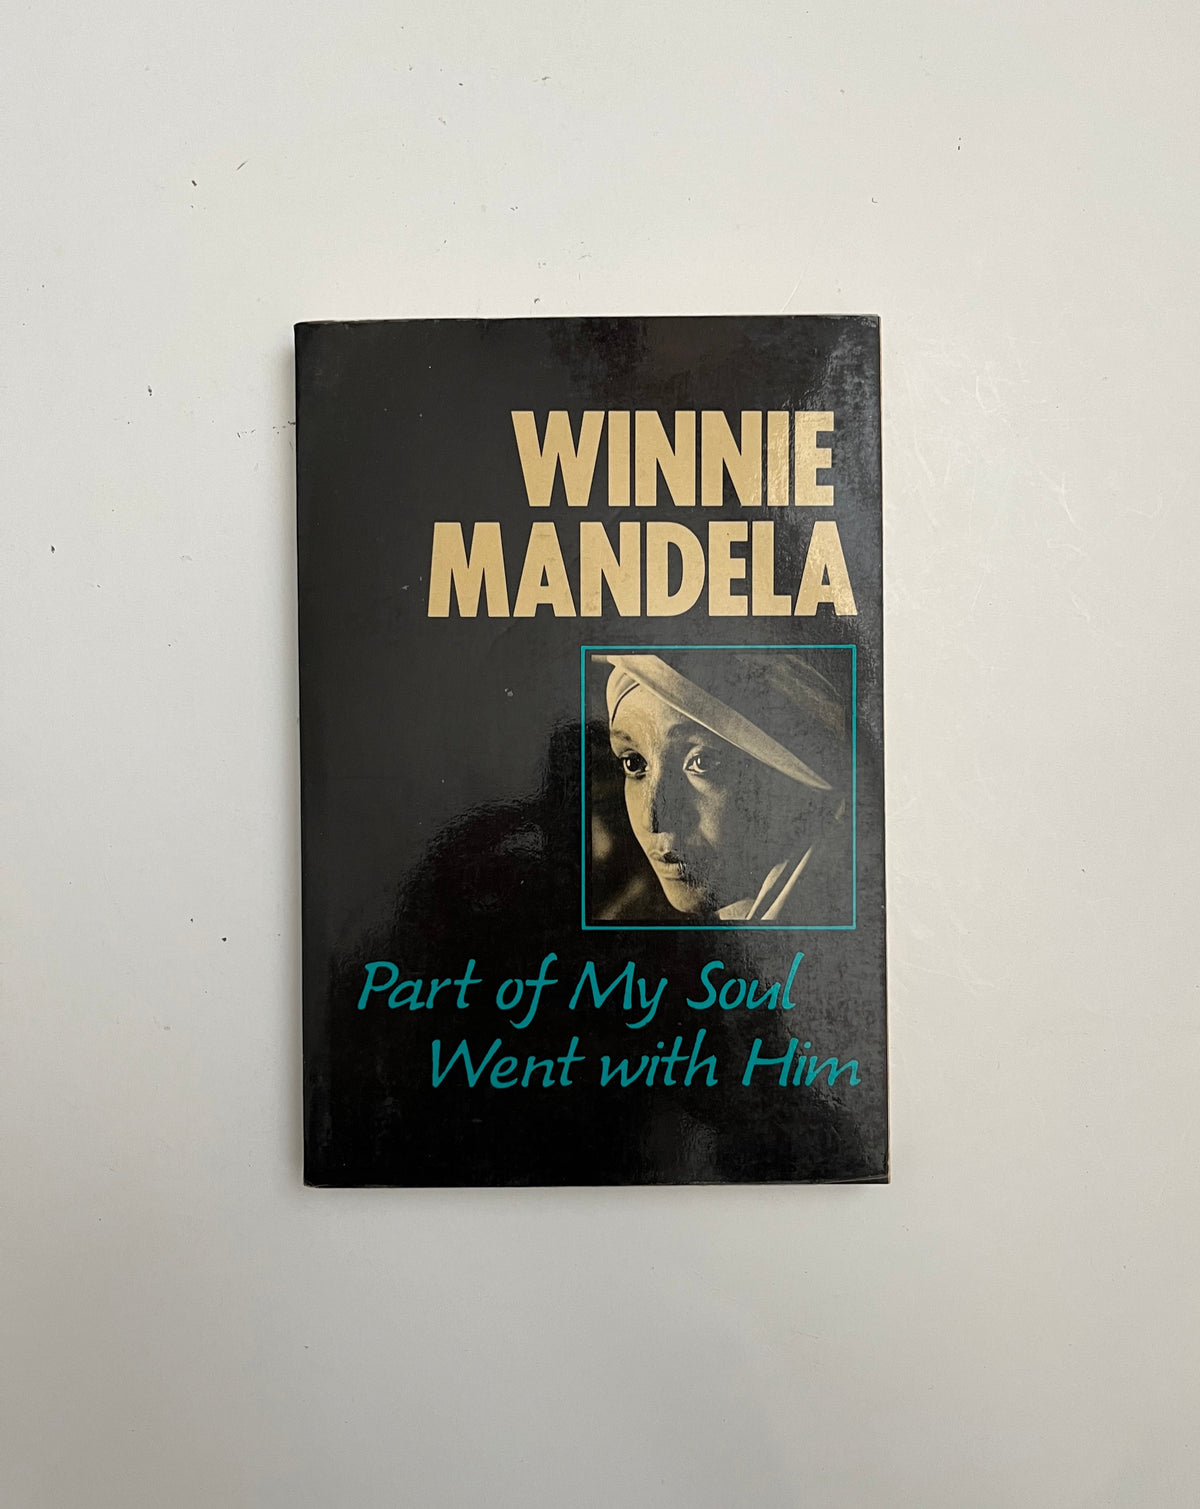 Part of My Soul Went With Him by Winnie Mandela